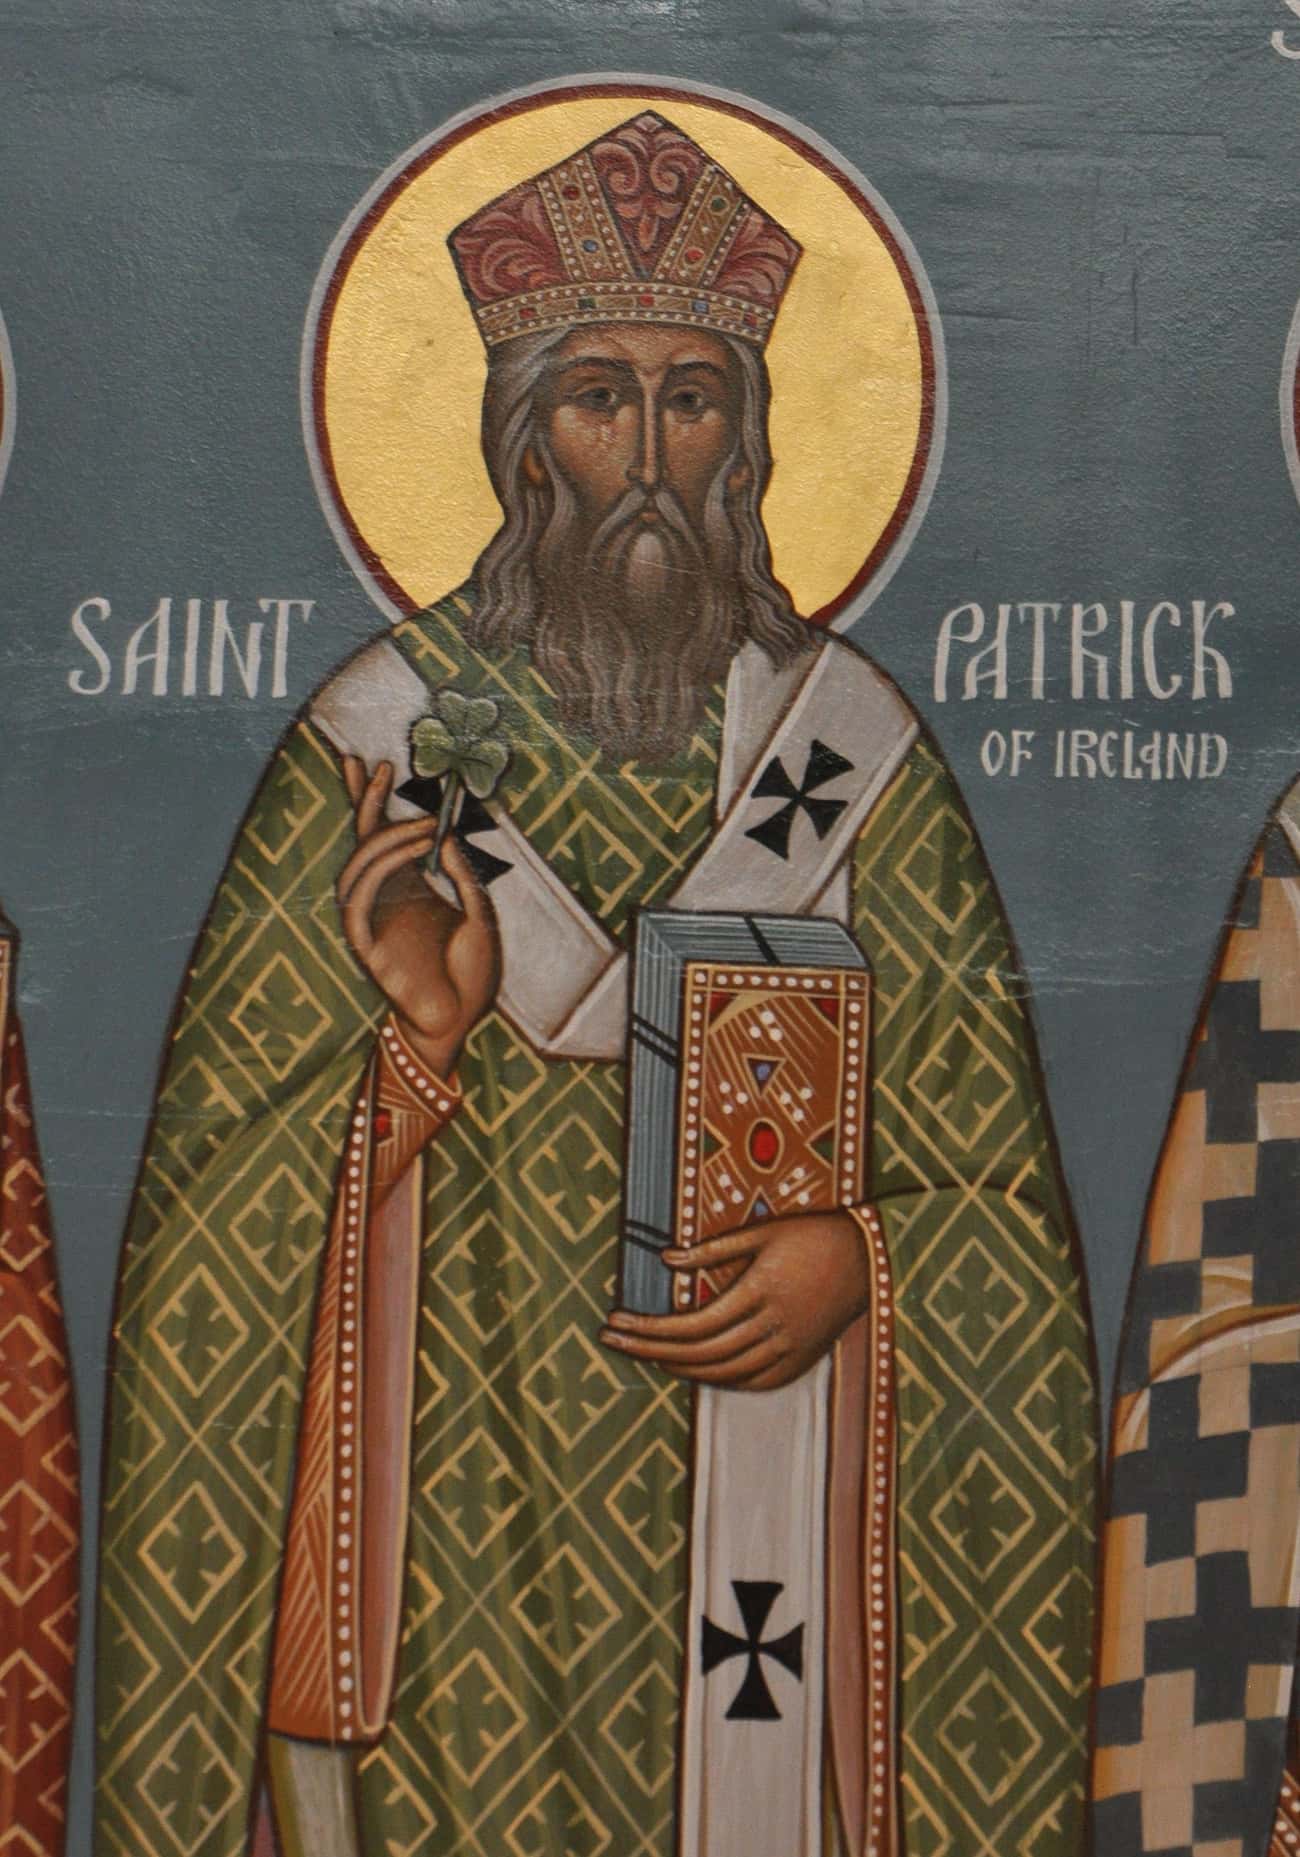 St. Patrick Wasn't English Either